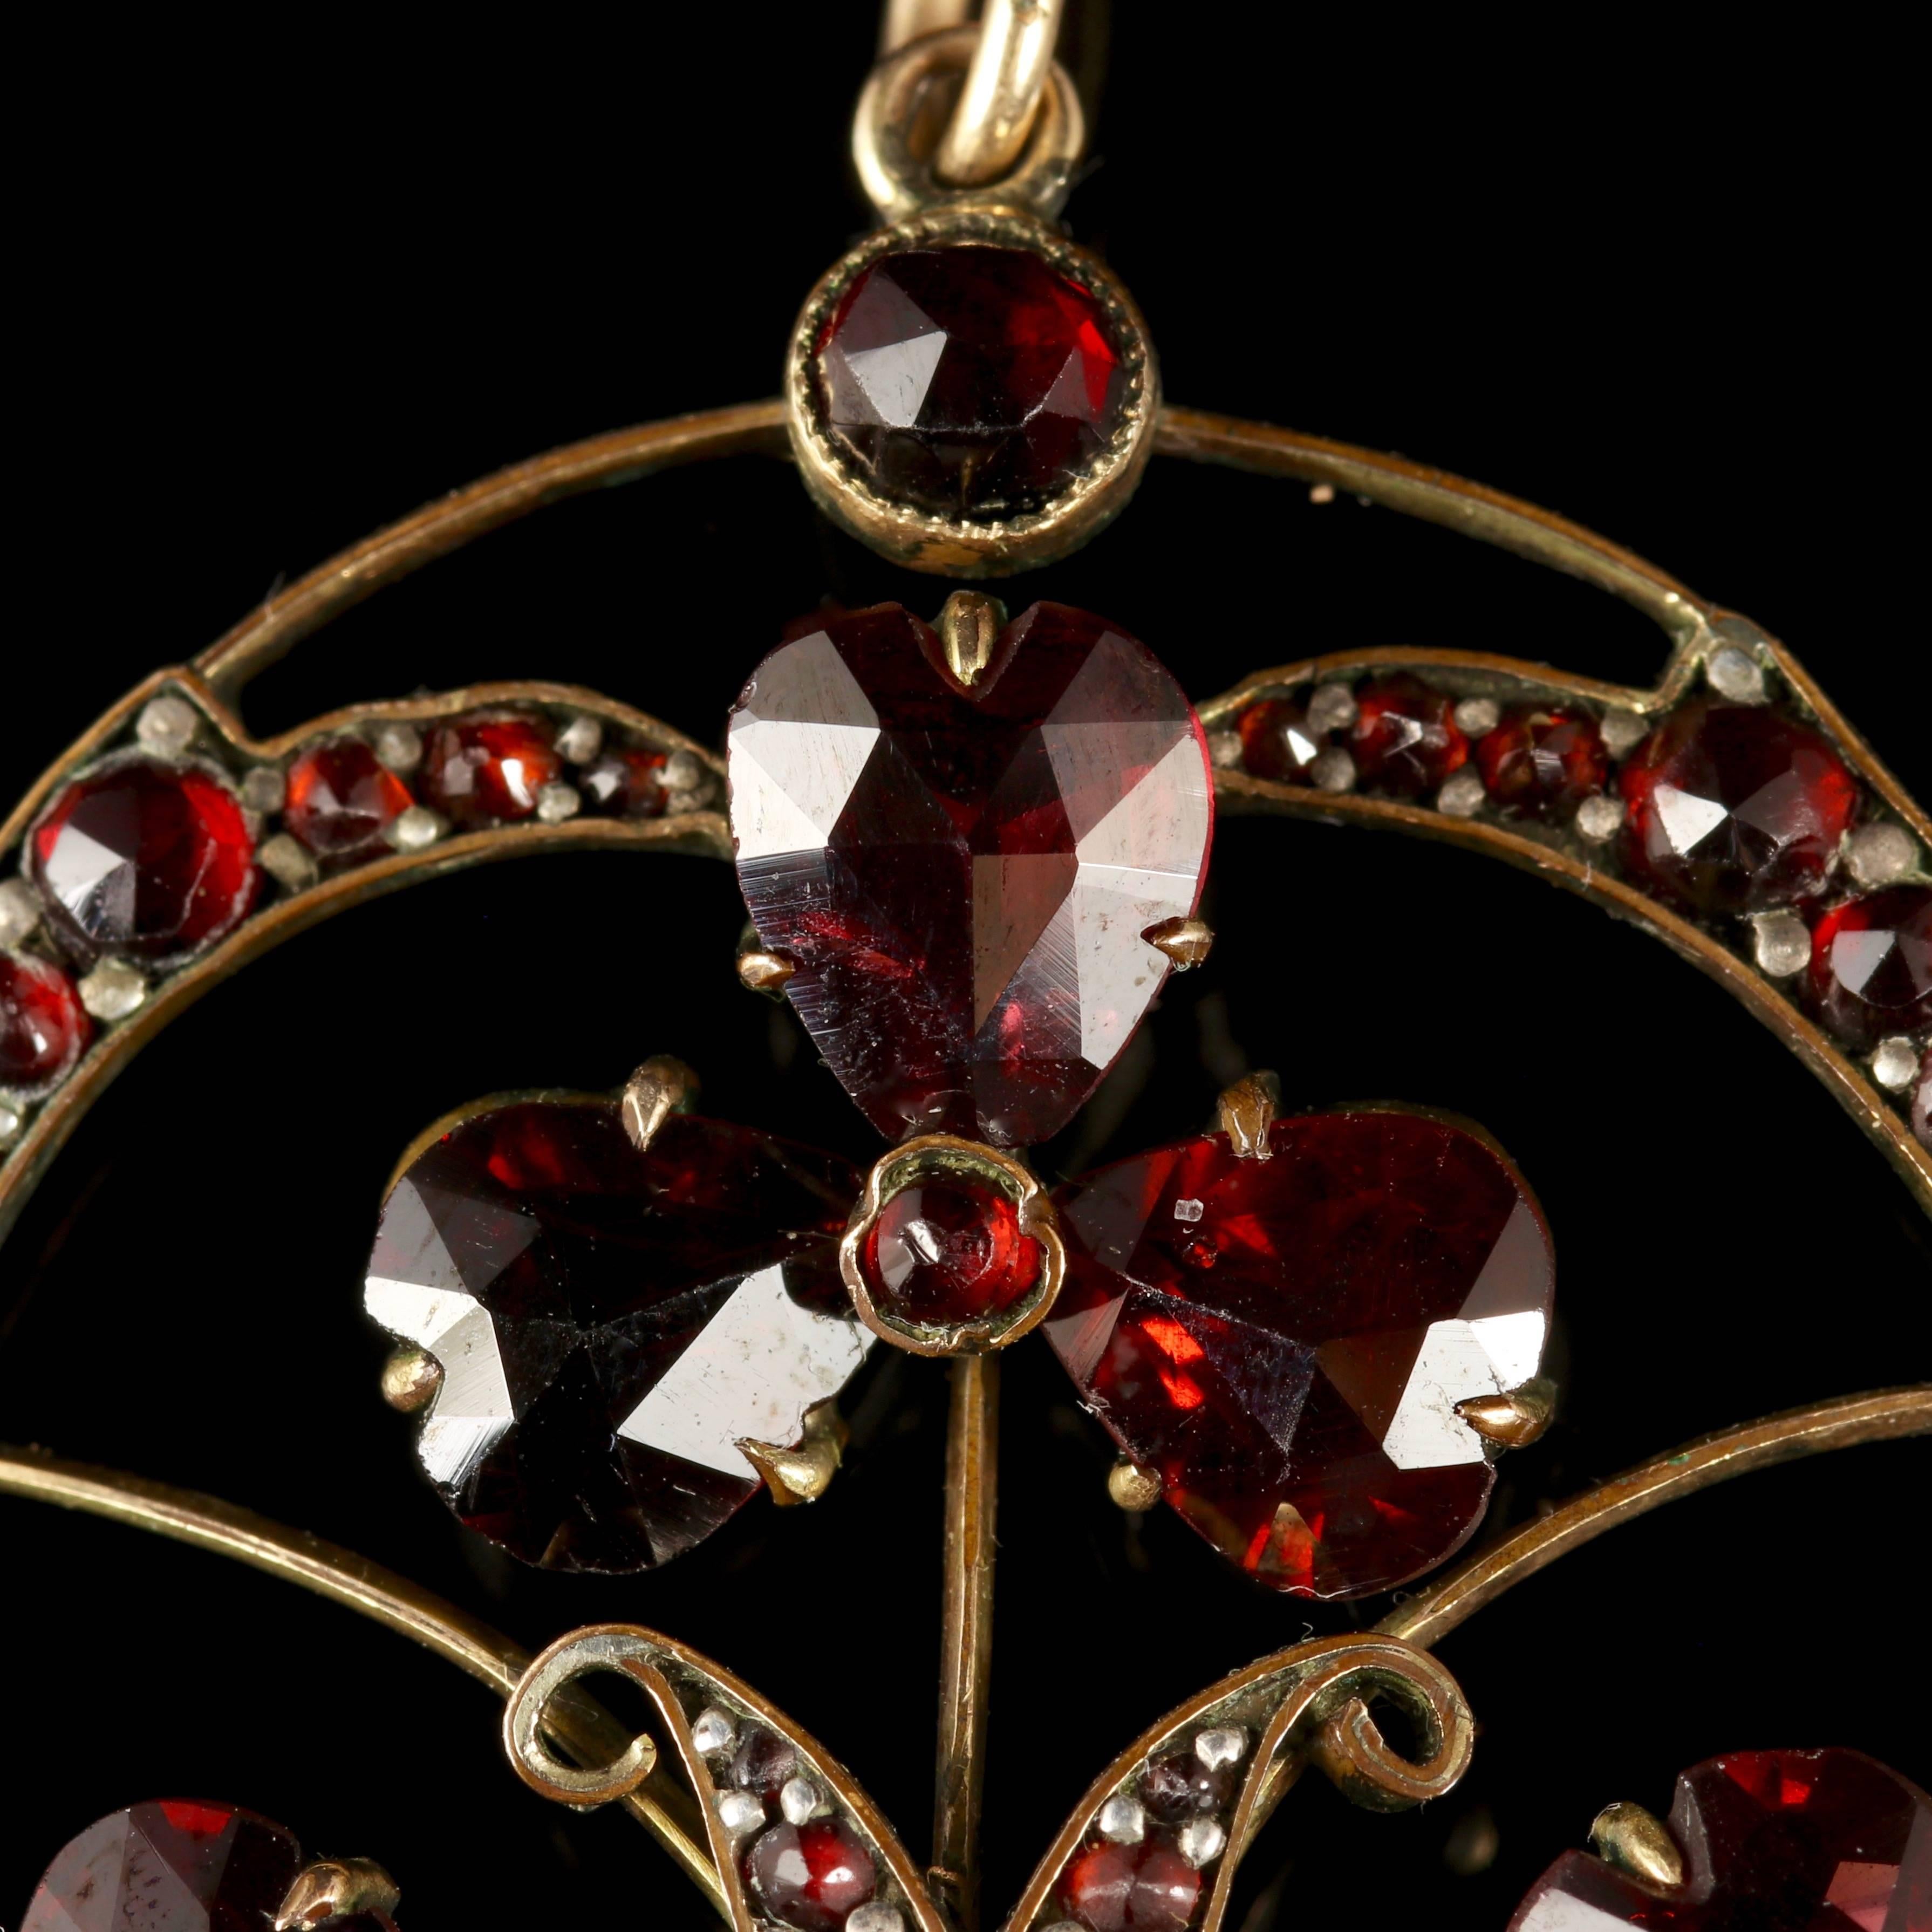 This genuine Victorian 9ct Gold Garnet pendant is fabulous.

A beautiful Victorian piece, circa 1880.

Set with old cut Garnets which are hand cut and polished as hearts in a three leaf clover shape which symbolises good luck.

The Garnet is a stone